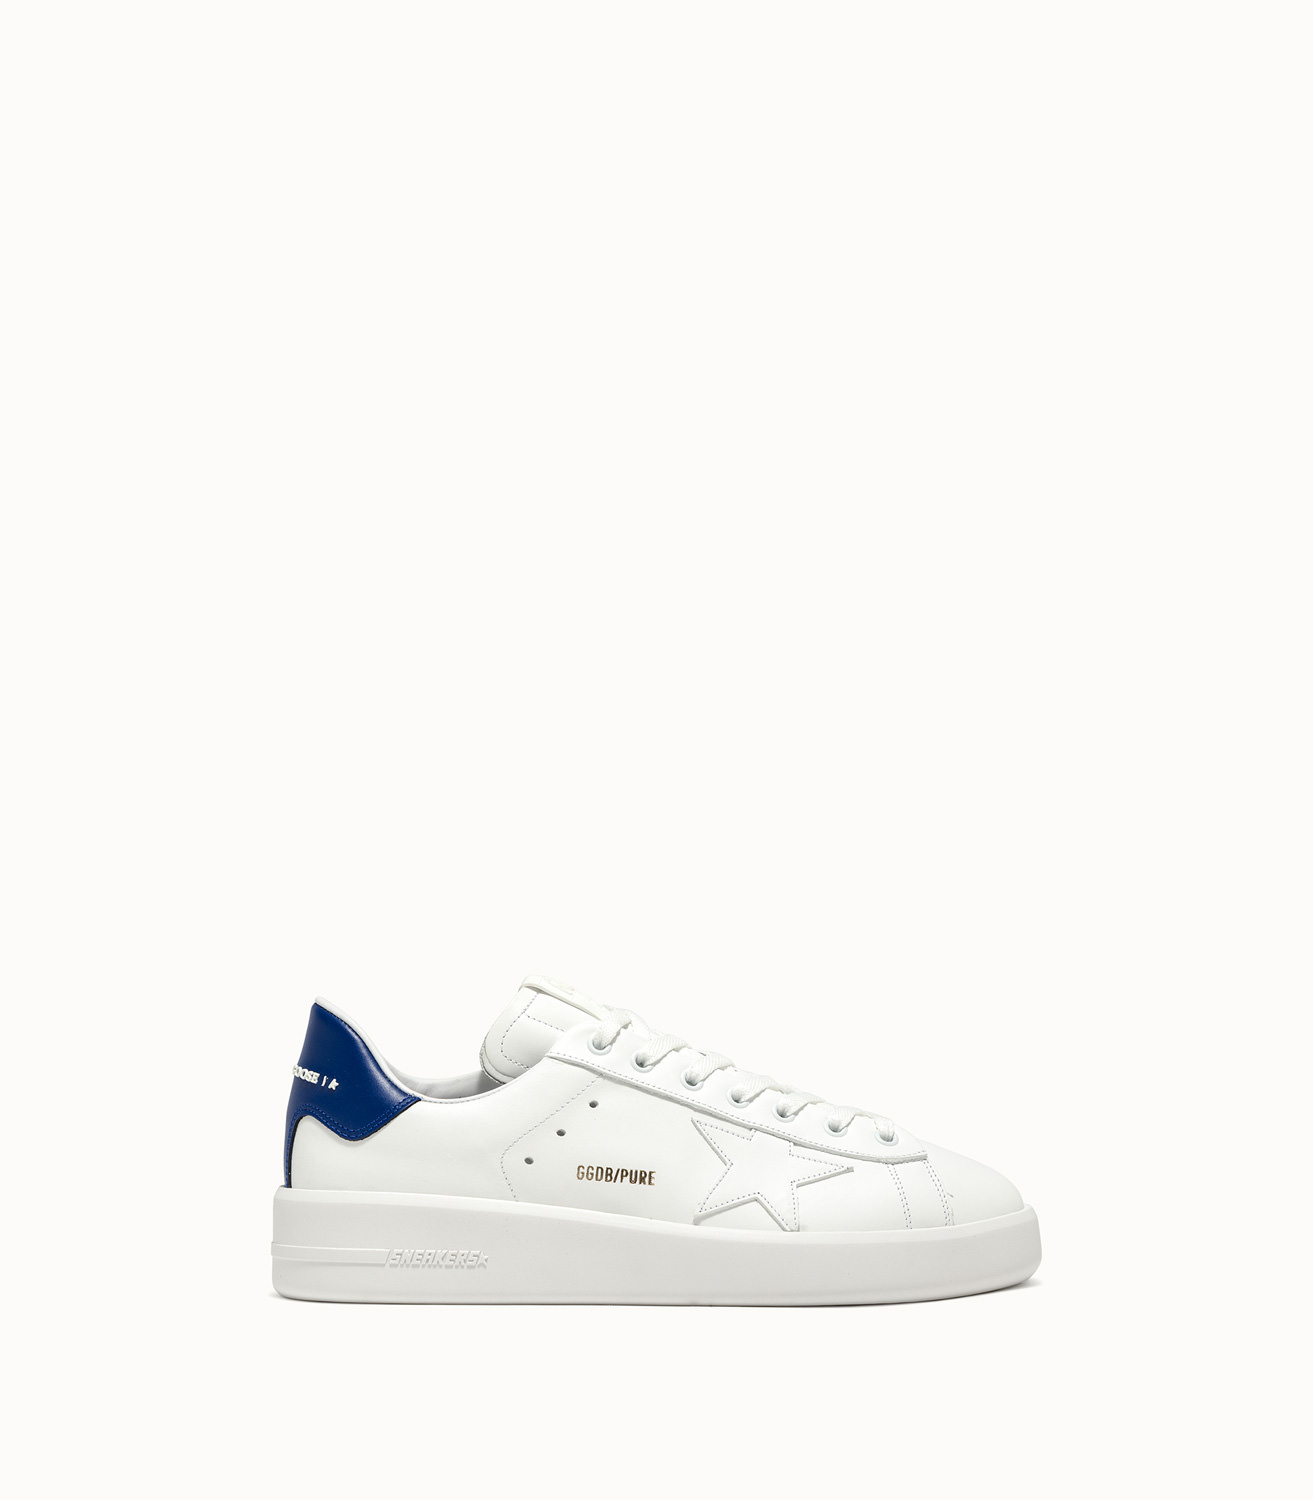 GOLDEN GOOSE DELUXE BRAND PURE STAR SNEAKERS COLOR WHITE BLUE | Play